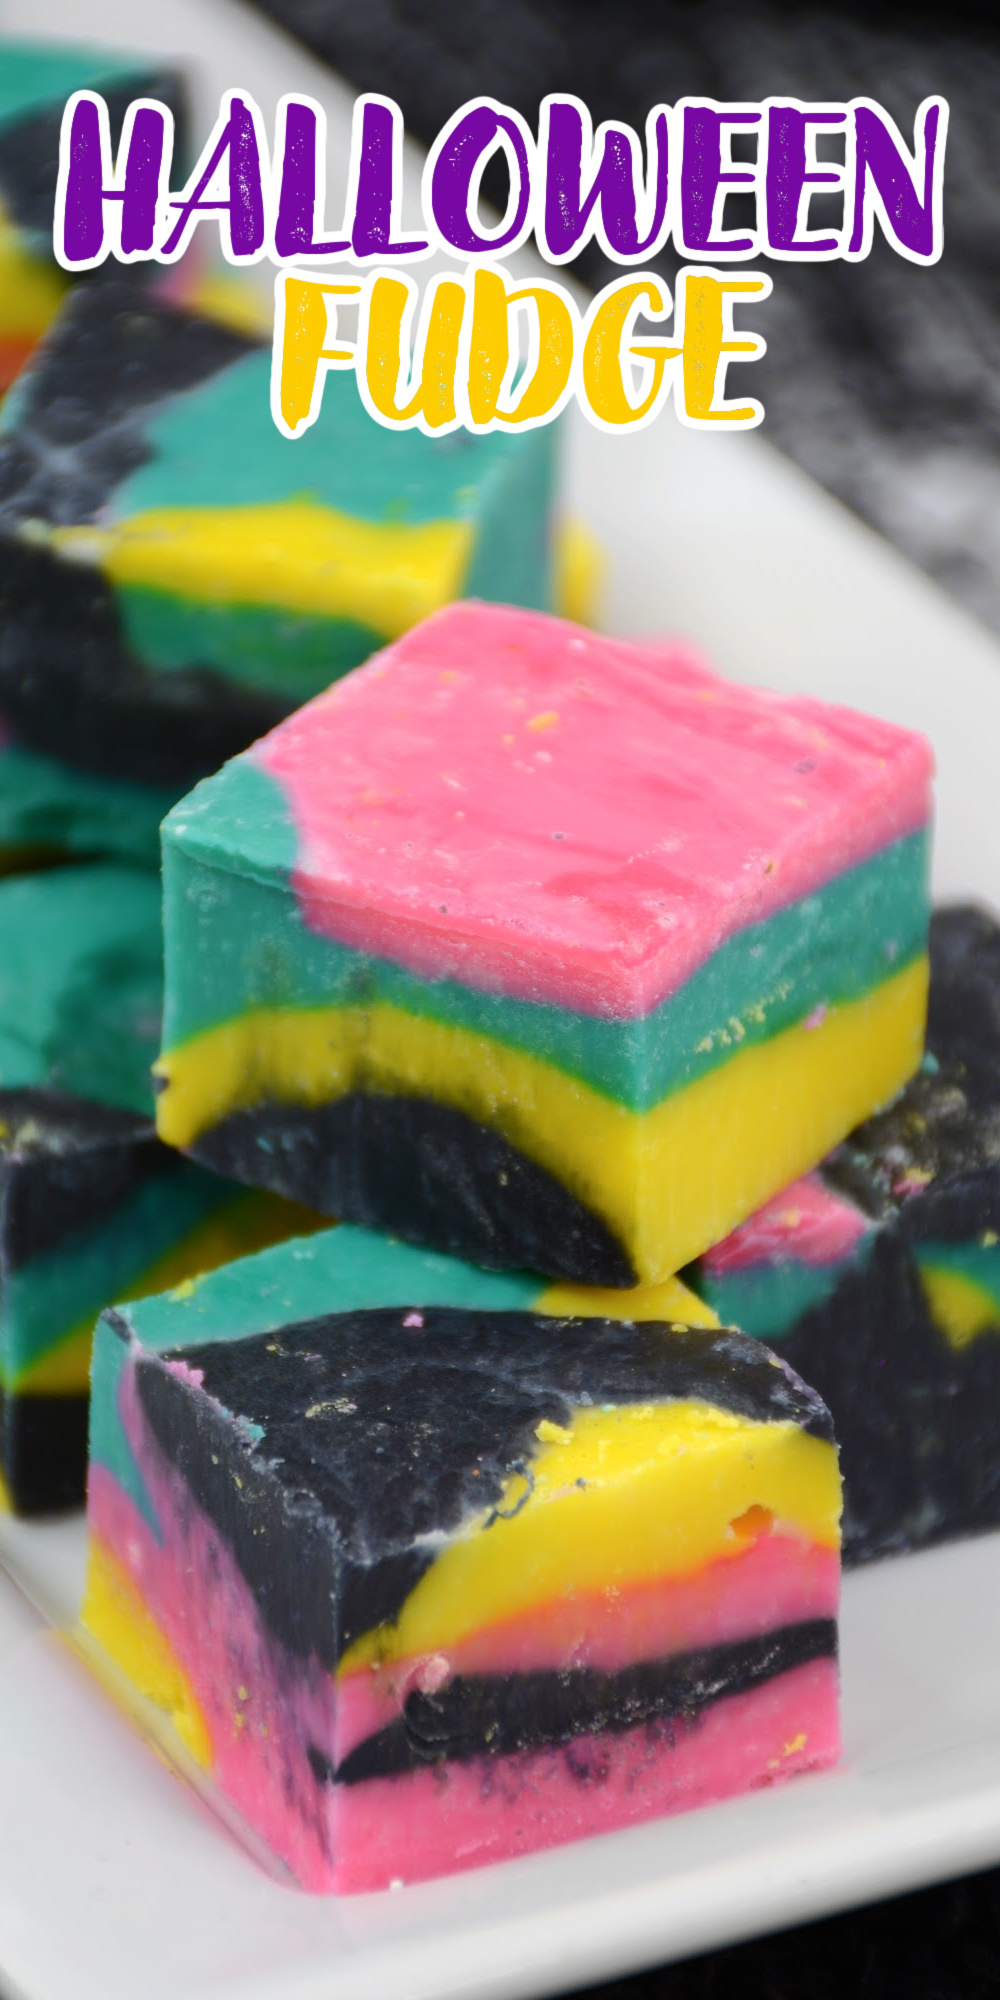 Halloween Fudge doesn't have to be just black and orange. We've made a fun colorful version with pink, teal, and yellow of this vanilla chocolate fudge recipe.